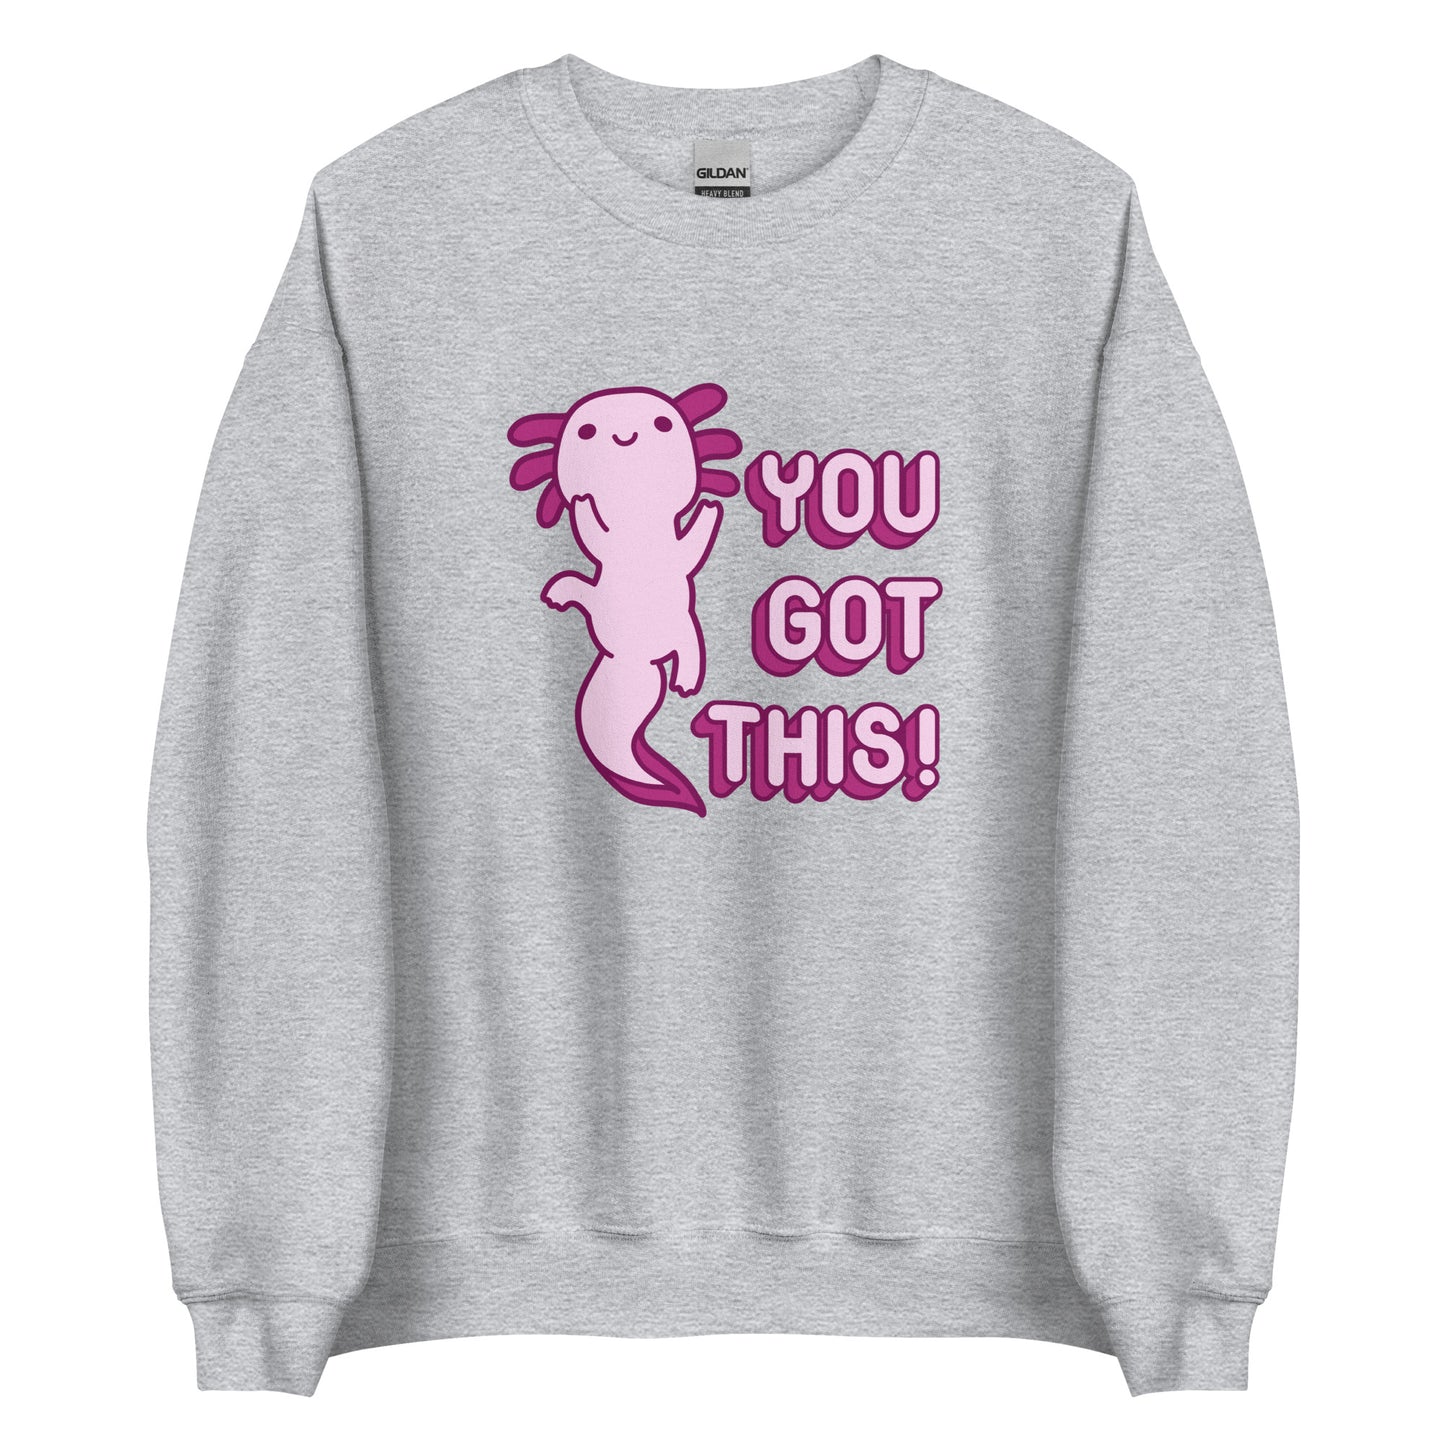 A gray crewneck sweatshirt featuring a picture of a a pink axolotl and the words "You Got This!" in pink bubble letters